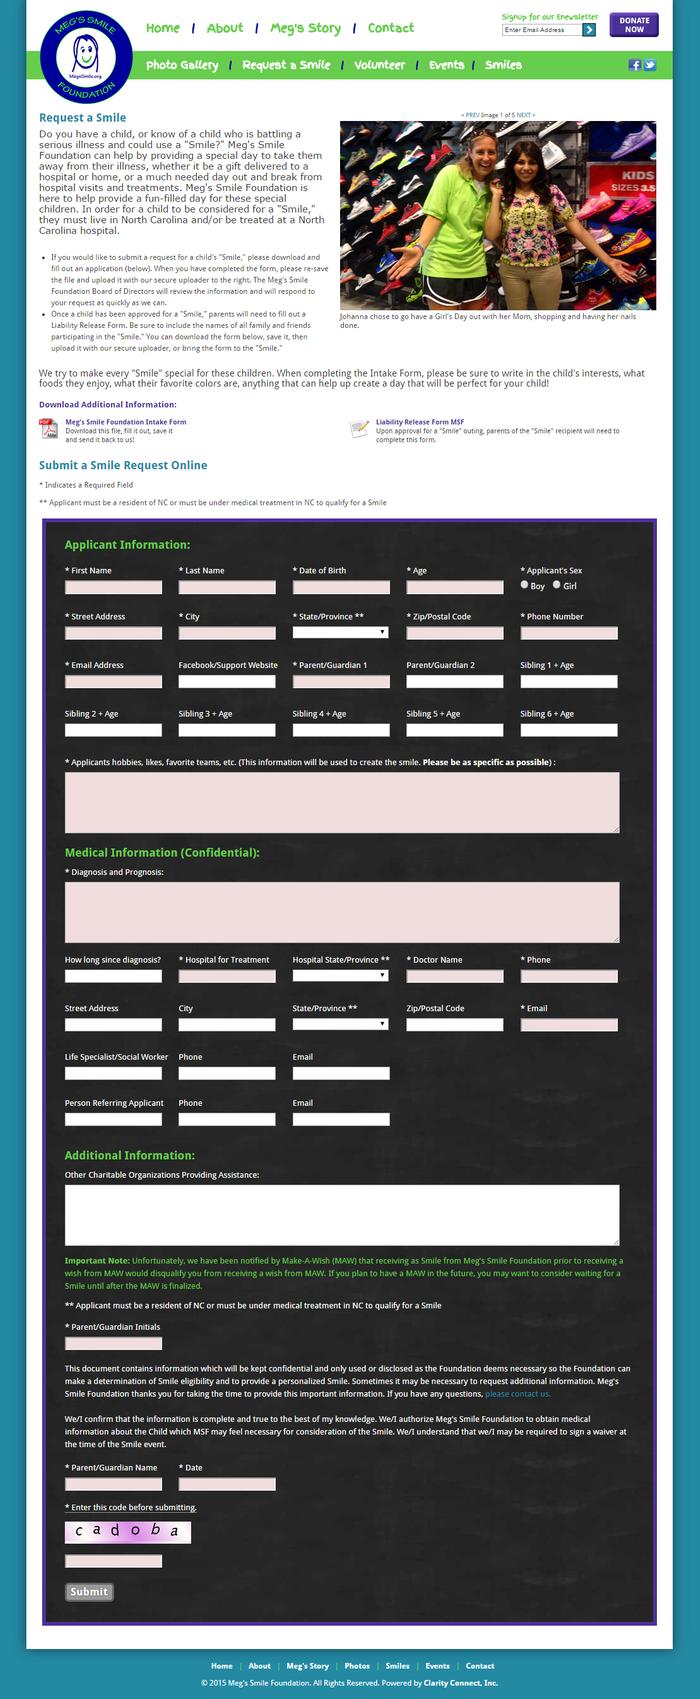 Form built for Meg's Smile Foundation so they can receive Smile Requests online